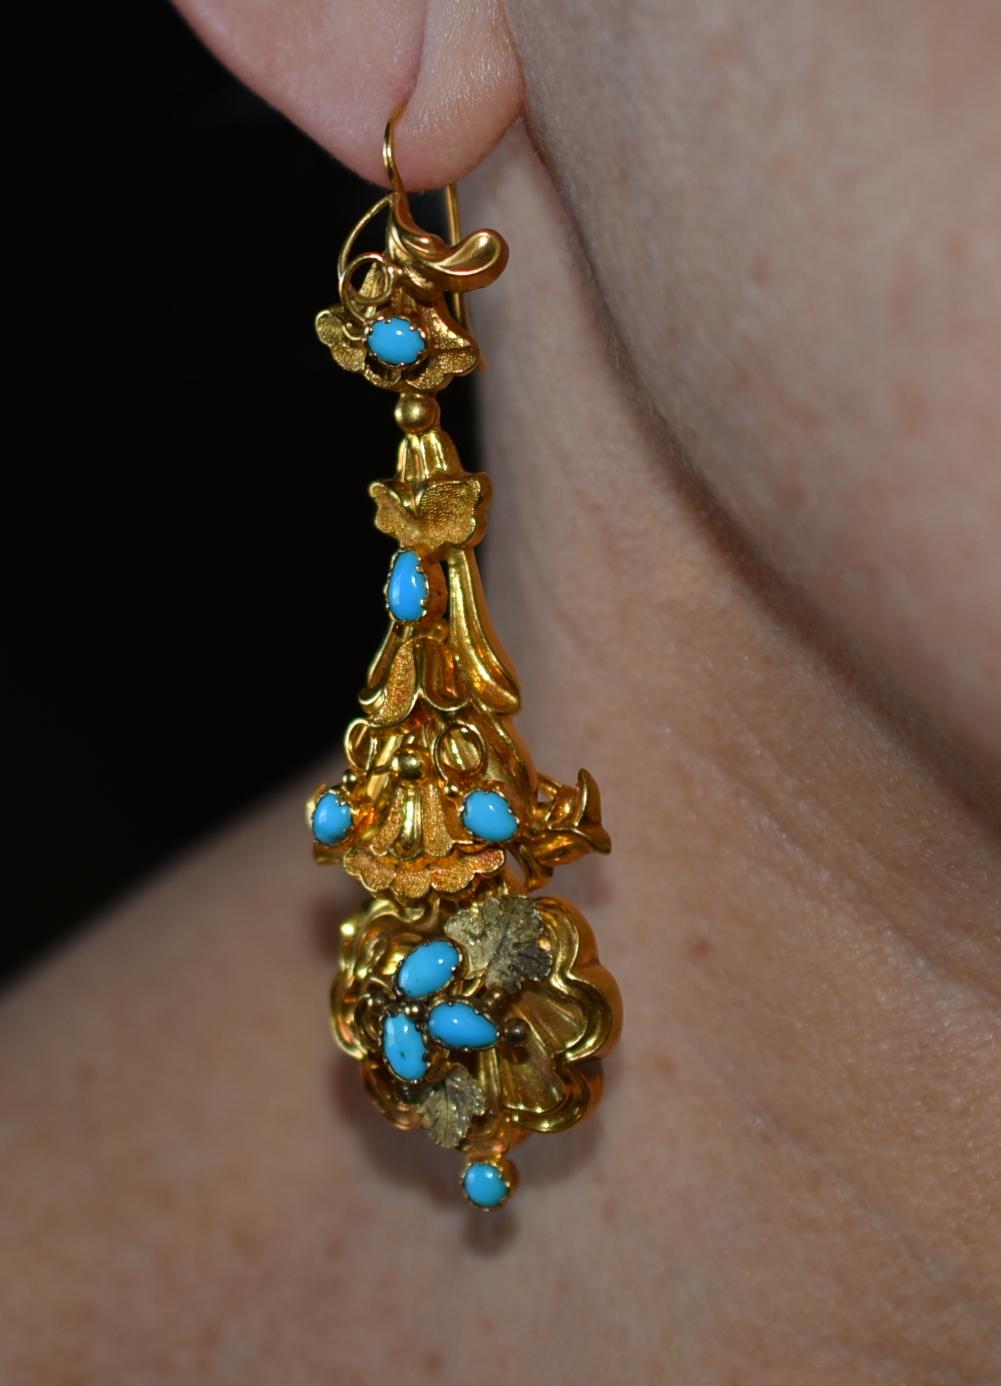 Women's Antique Turqouise and Gold Drop Earrings, circa 1850